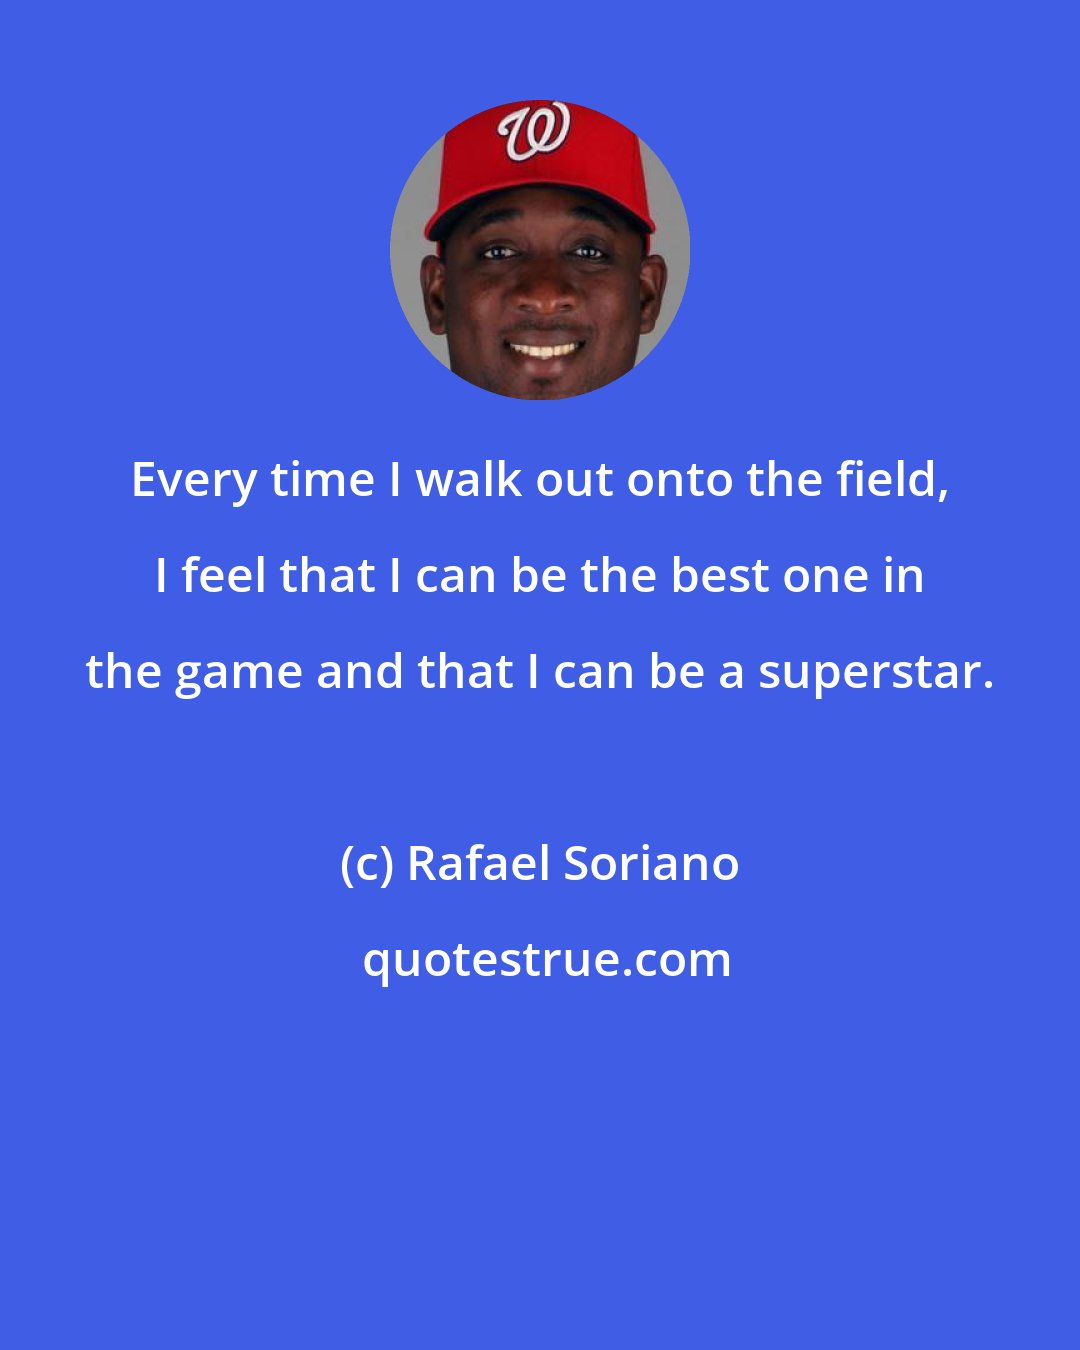 Rafael Soriano: Every time I walk out onto the field, I feel that I can be the best one in the game and that I can be a superstar.